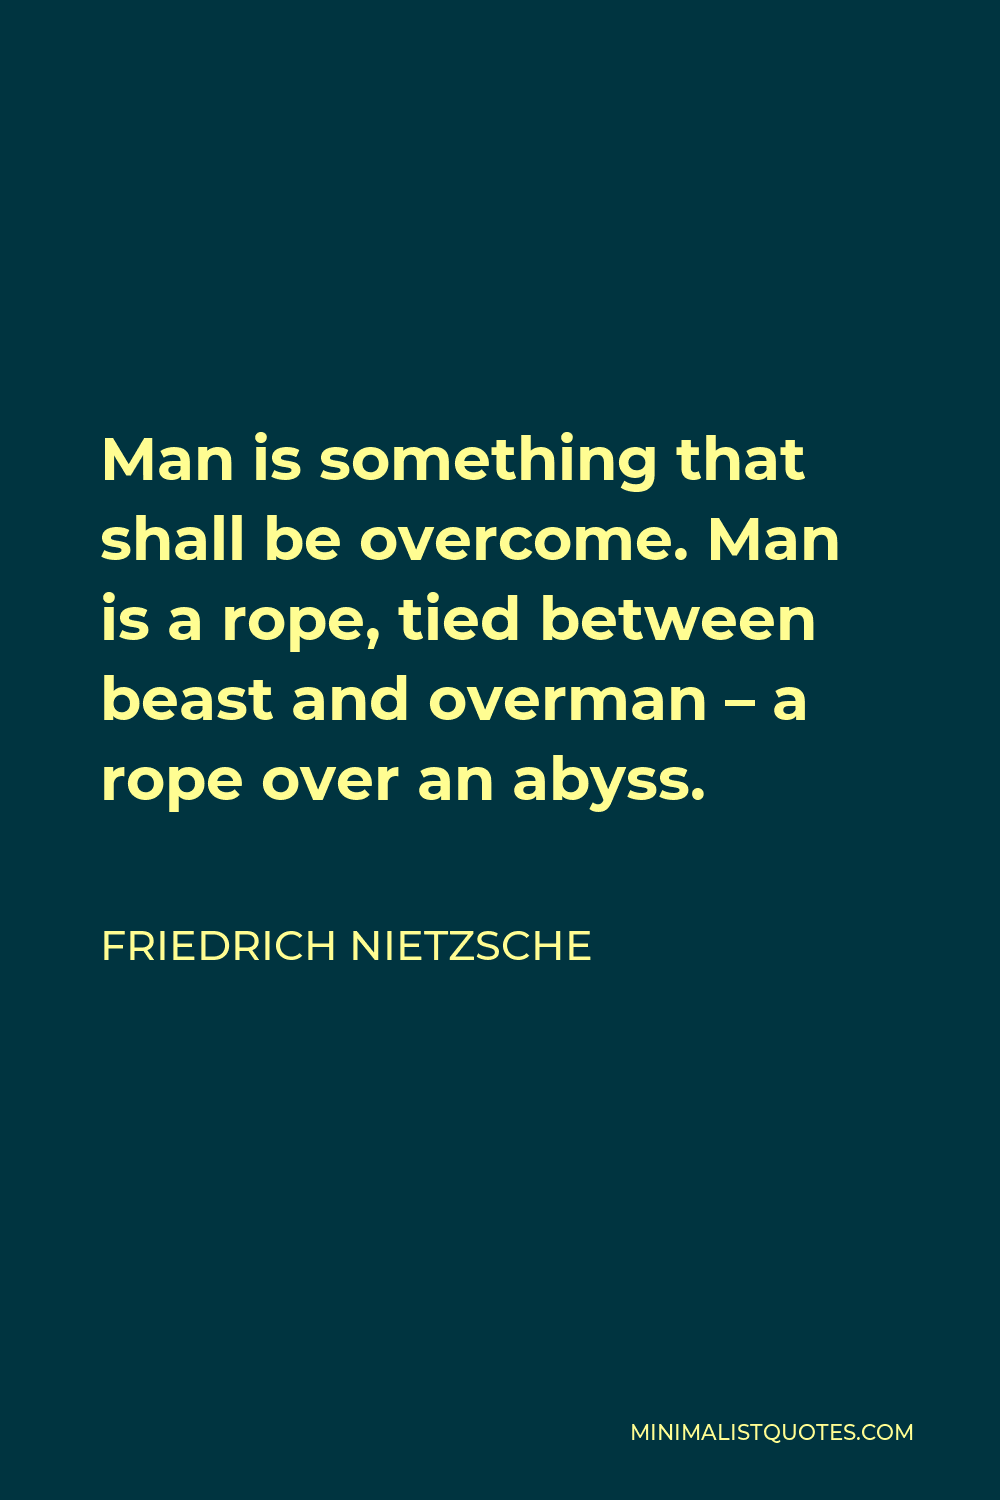 Friedrich Nietzsche Quote - Man is something that shall be overcome. Man is a rope, tied between beast and overman – a rope over an abyss.